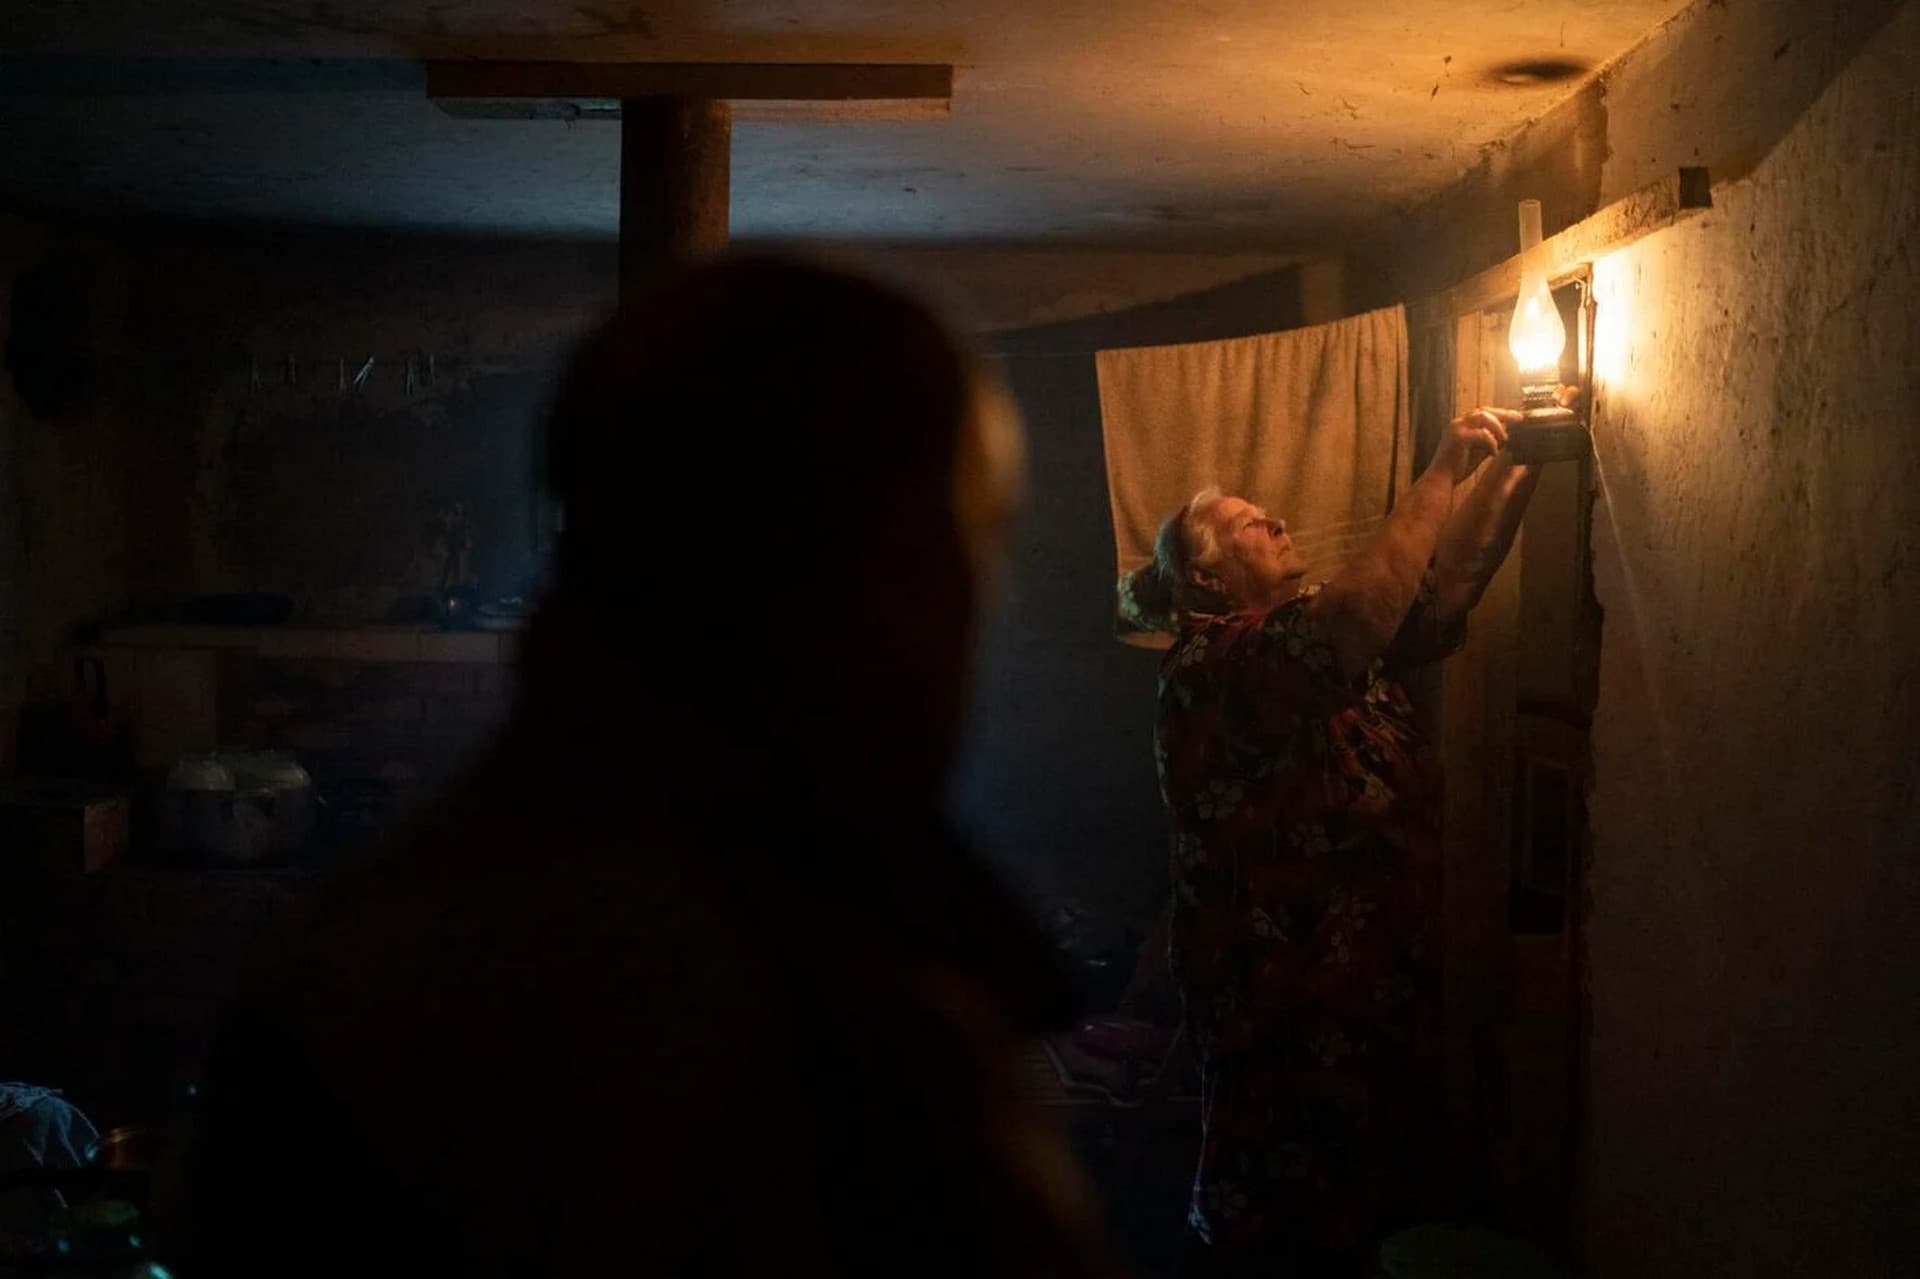 Liudmyla Dmyttruk lights up an oil lamp, as she shows the basement where she is living together with her neighbors in the freed village of Hrakove